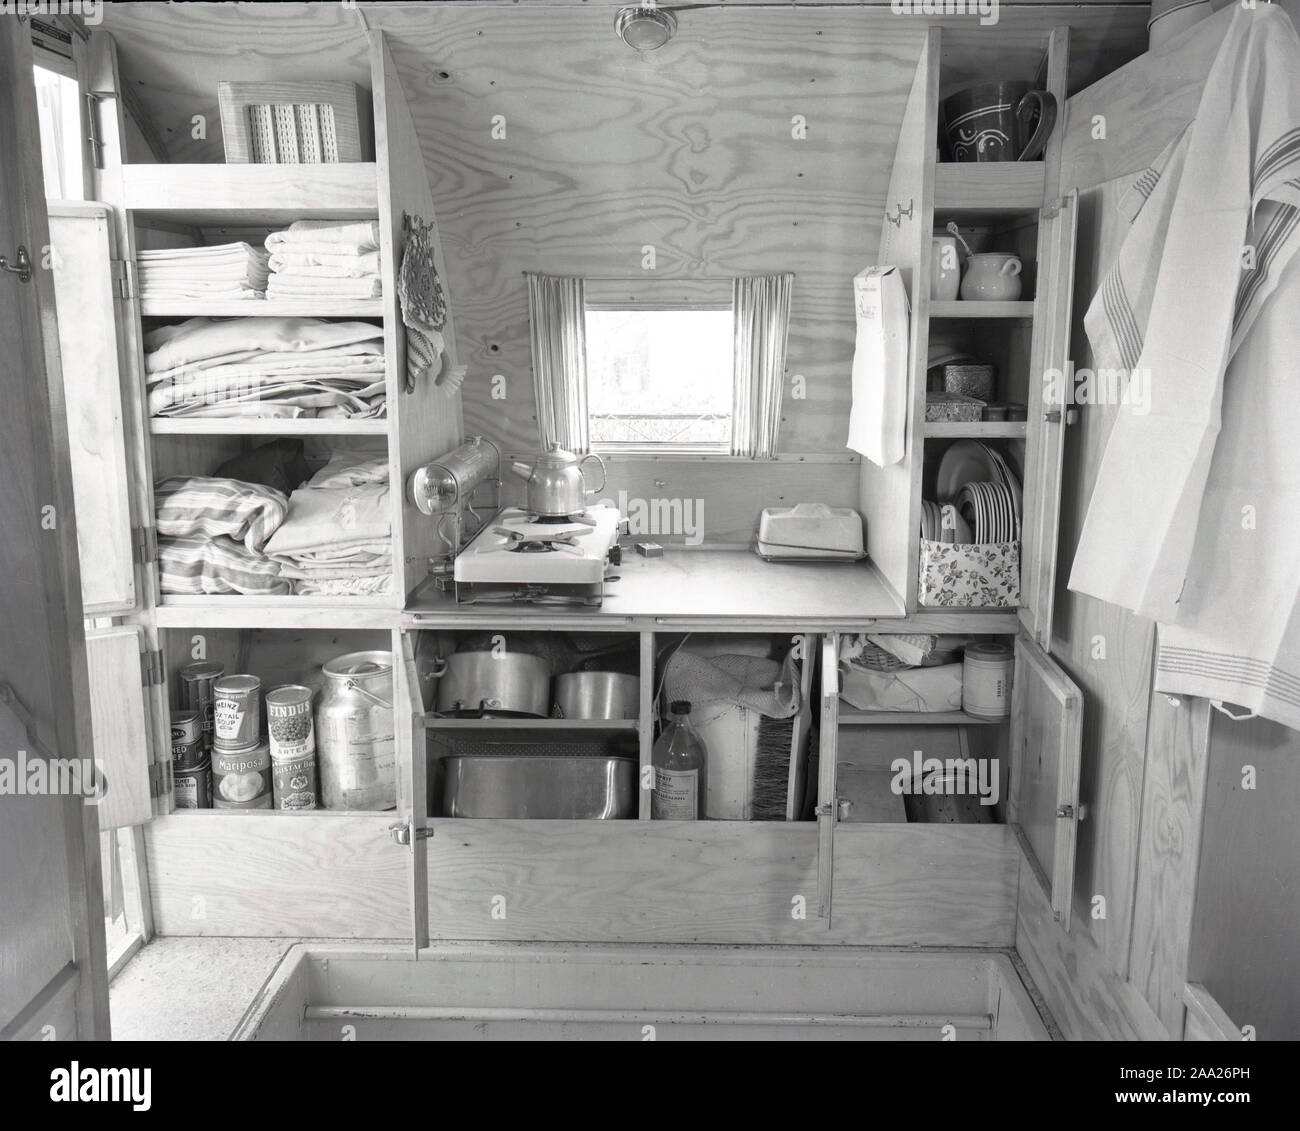 1950s camping. A family is enjoying their holiday and the practial camping life in their caravan. Demonstrating how well everything works for them even on holiday. The picture shows the practical storage for pots and pans, cups and plates. Sweden 1952 Ref 2021 Stock Photo